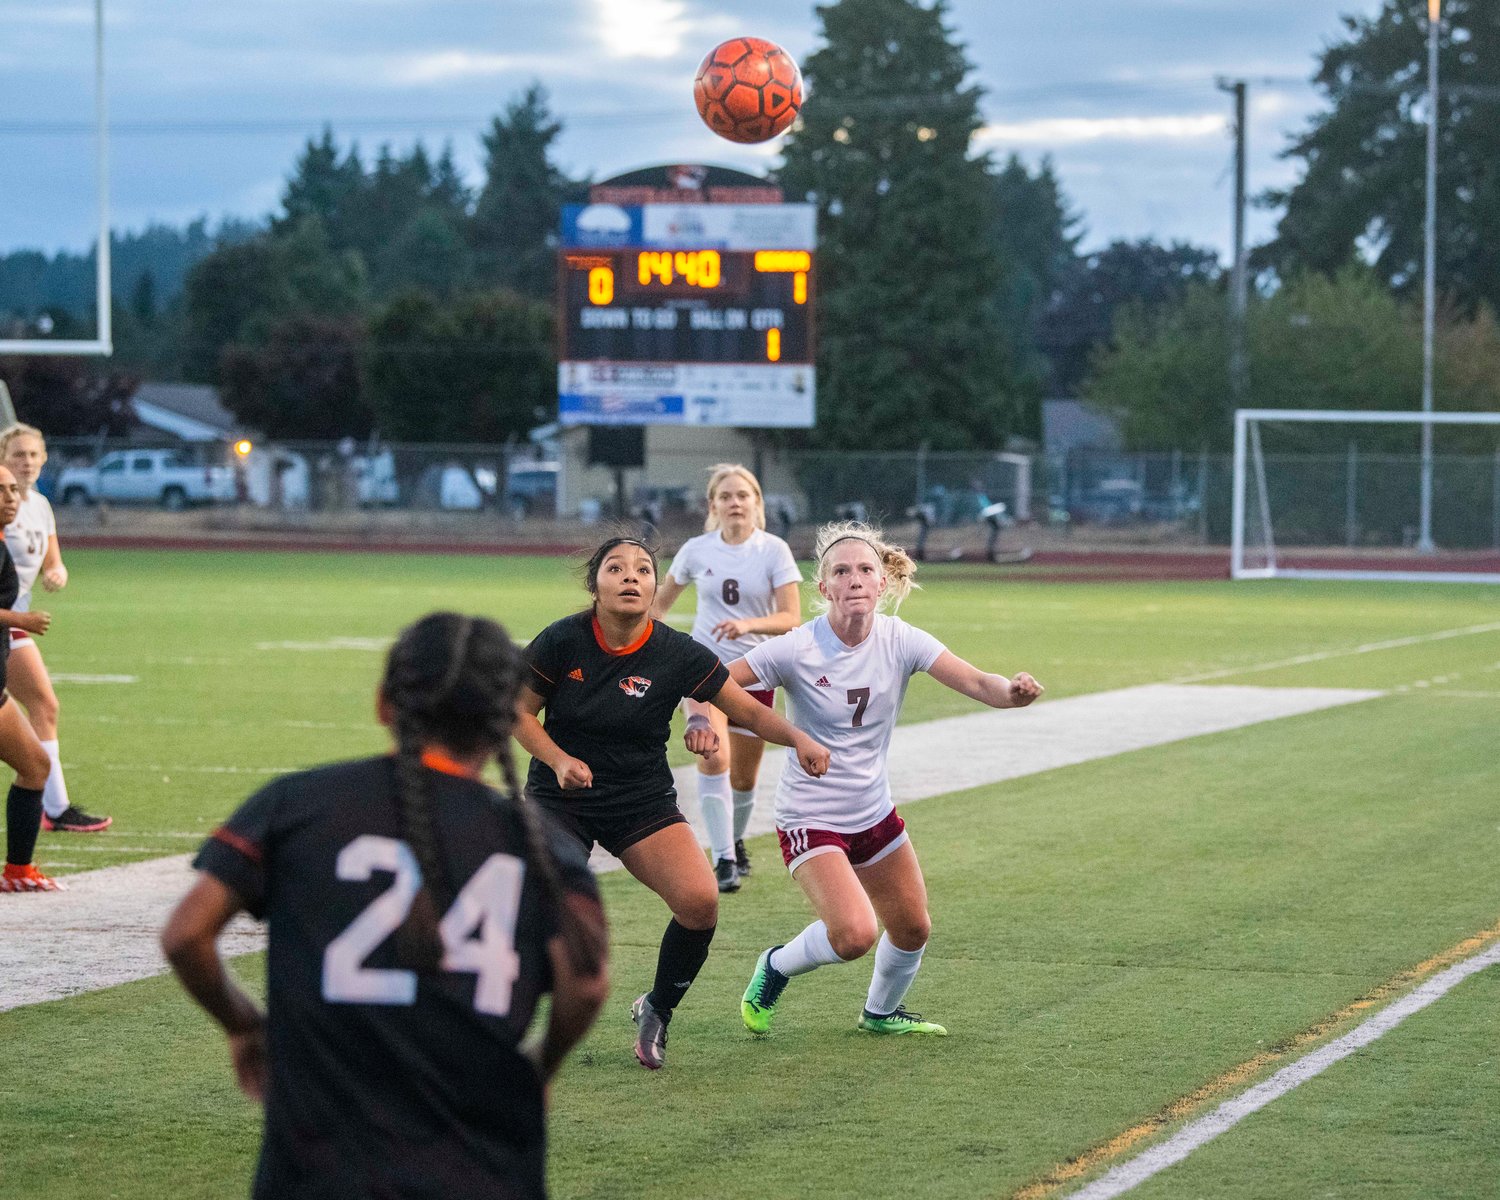 Tigers and Bearcats fight for possession of the ball on a throw in Thursday in Centralia.